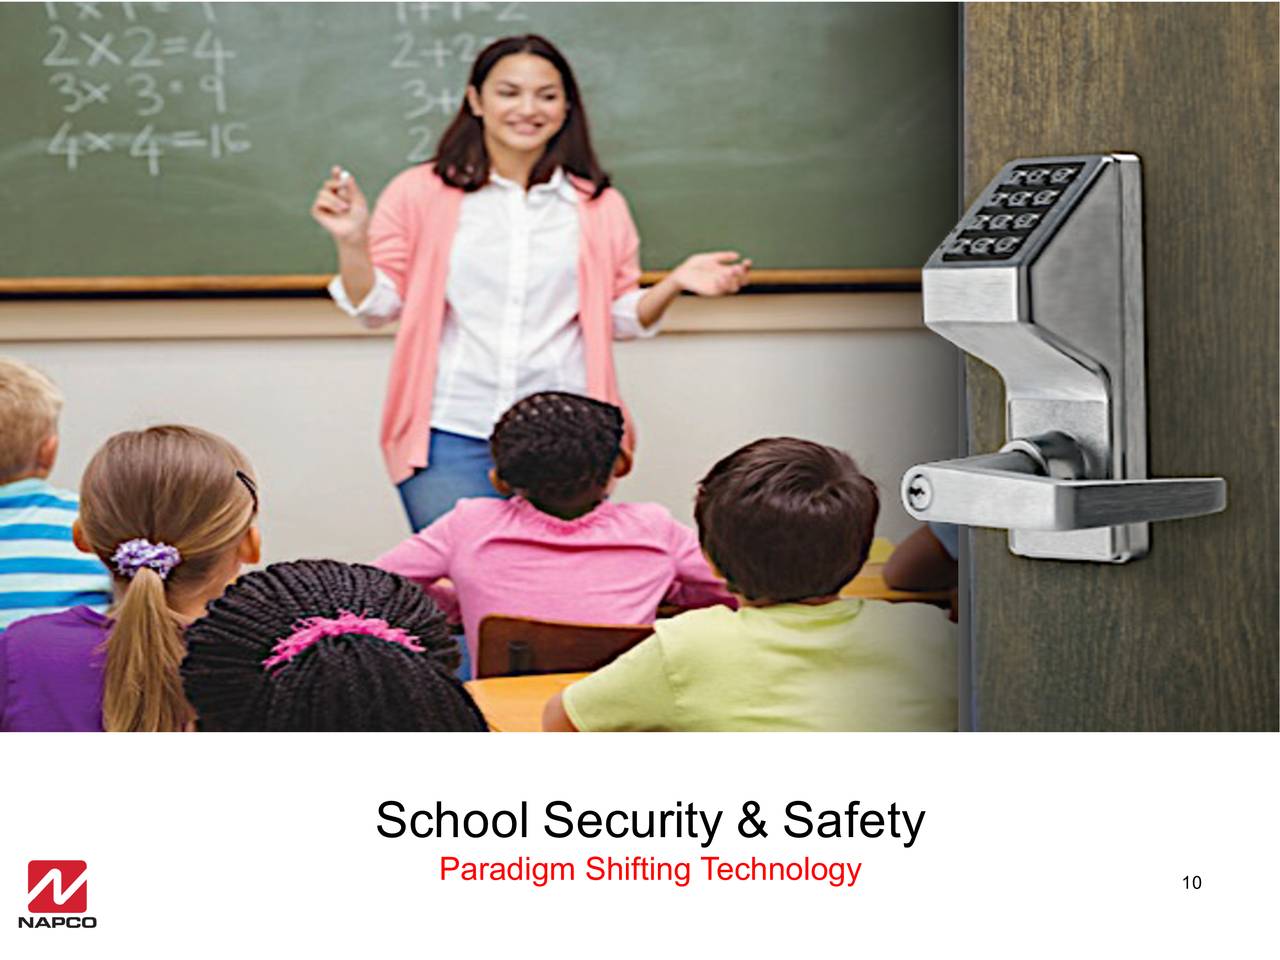 School Security & Safety